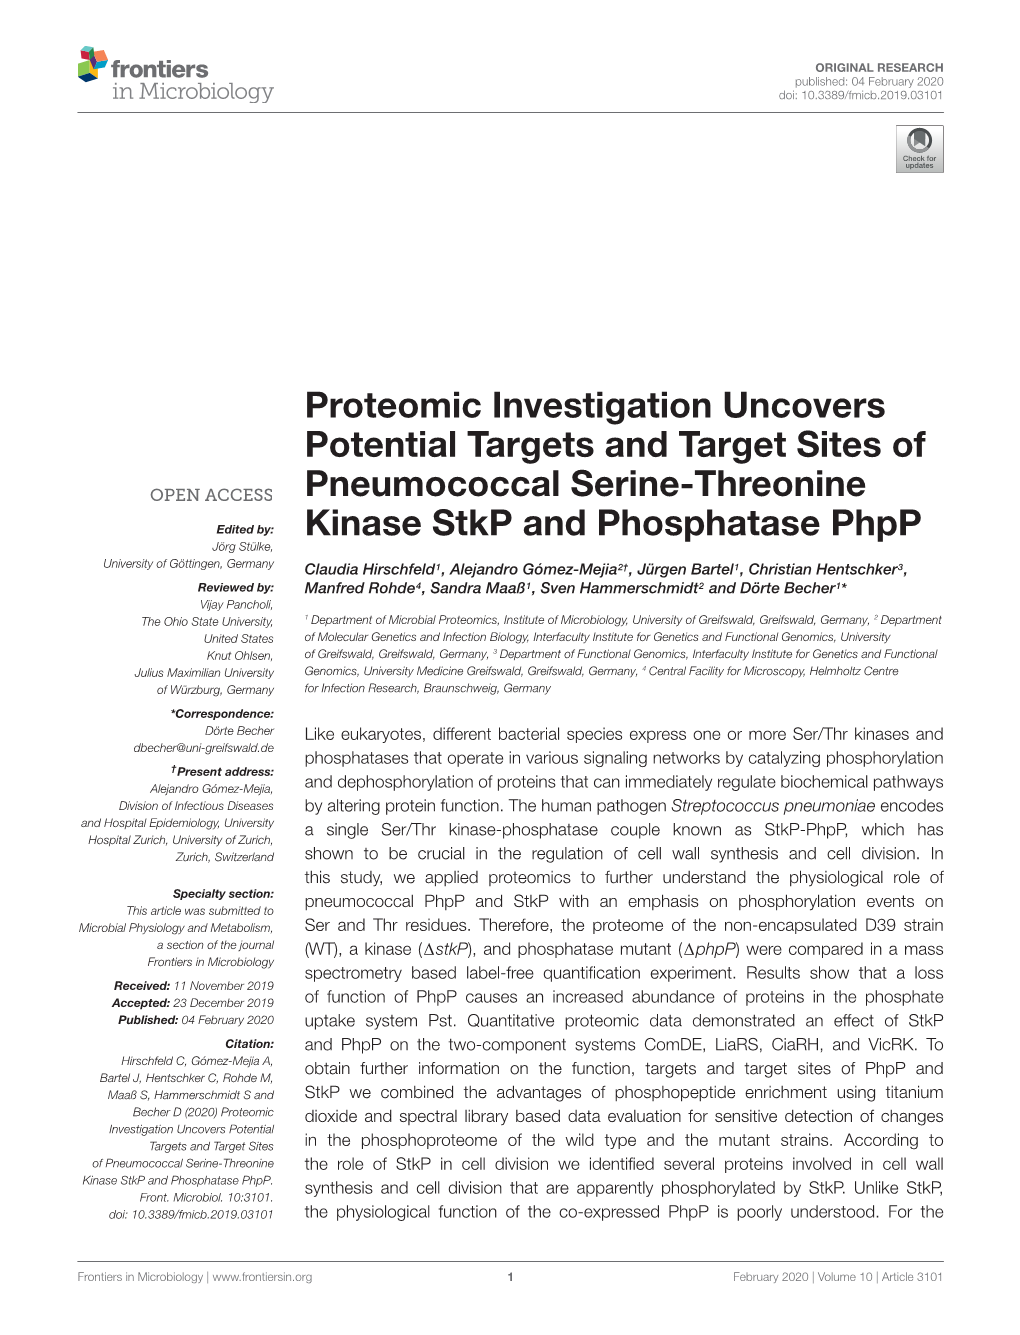 Proteomic Investigation Uncovers Potential Targets and Target Sites of Pneumococcal Serine-Threonine